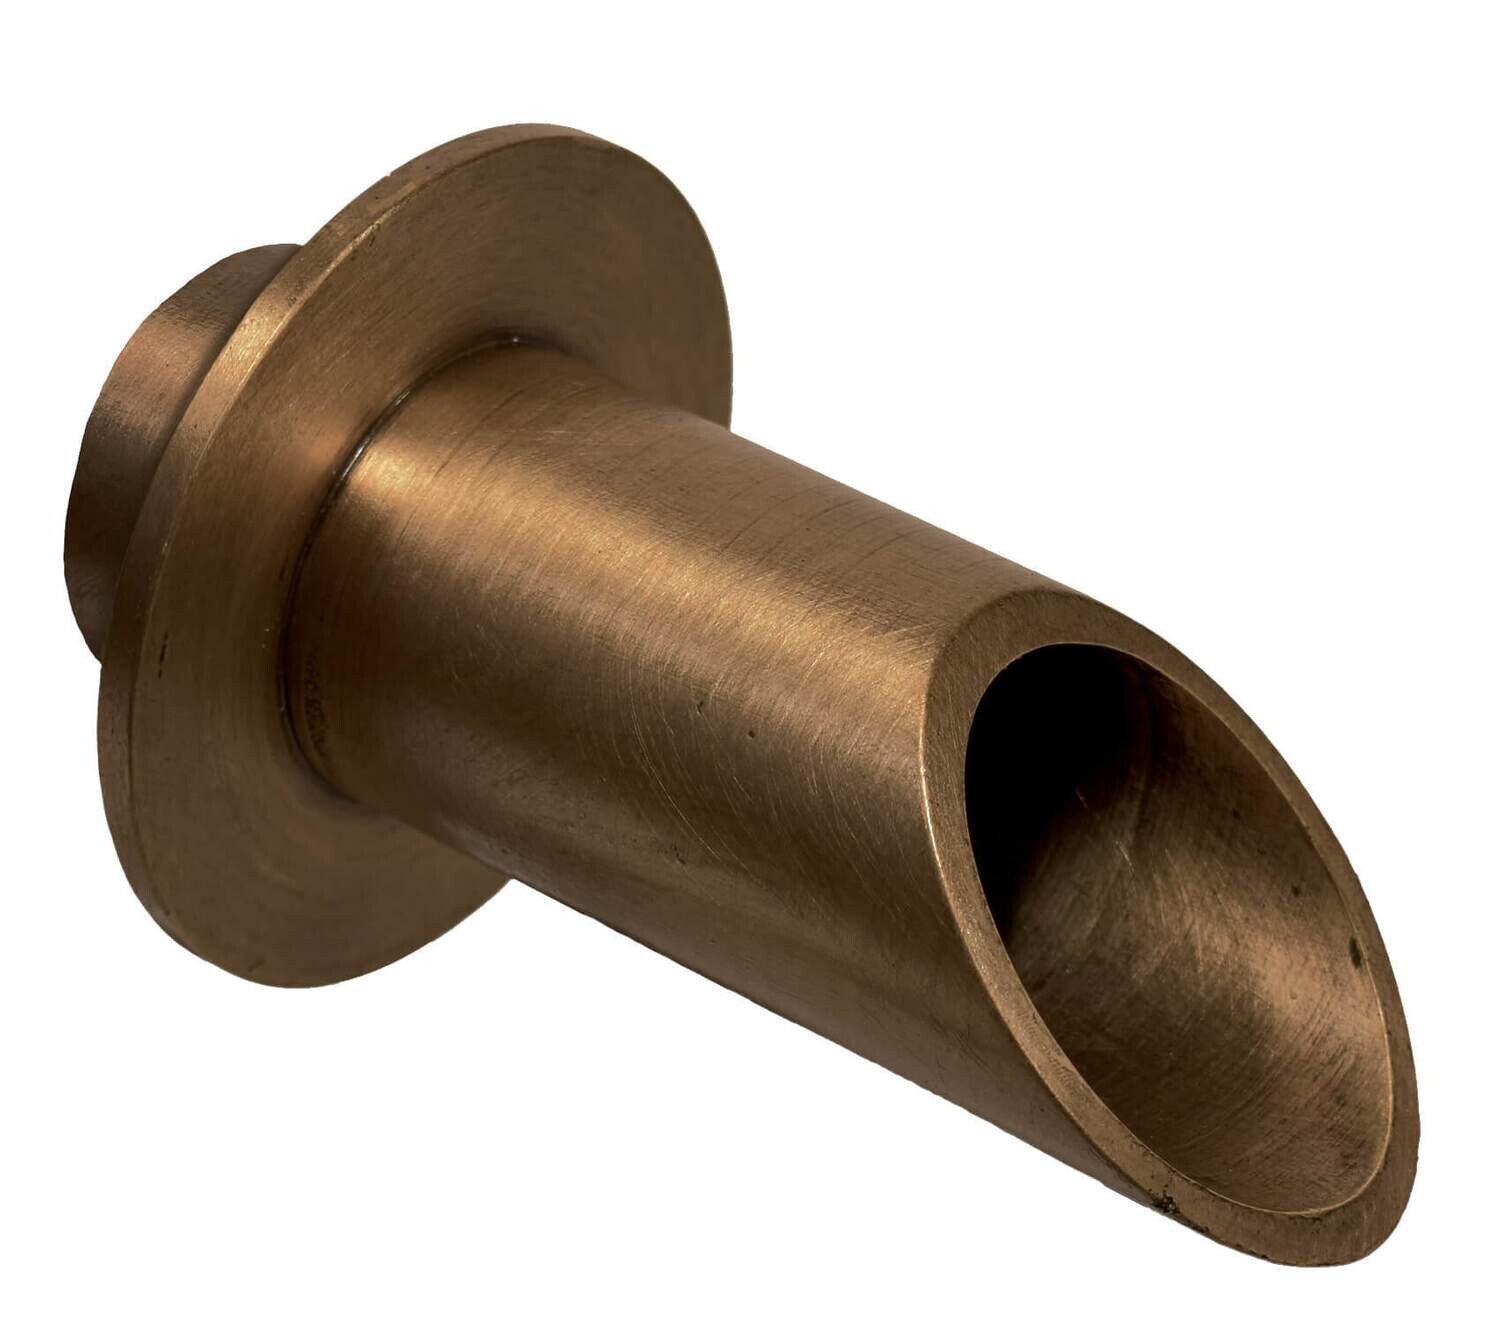 EASY PRO Vianti Falls Brass 2" Round Scupper with round wall plate Antique finish for classic look.